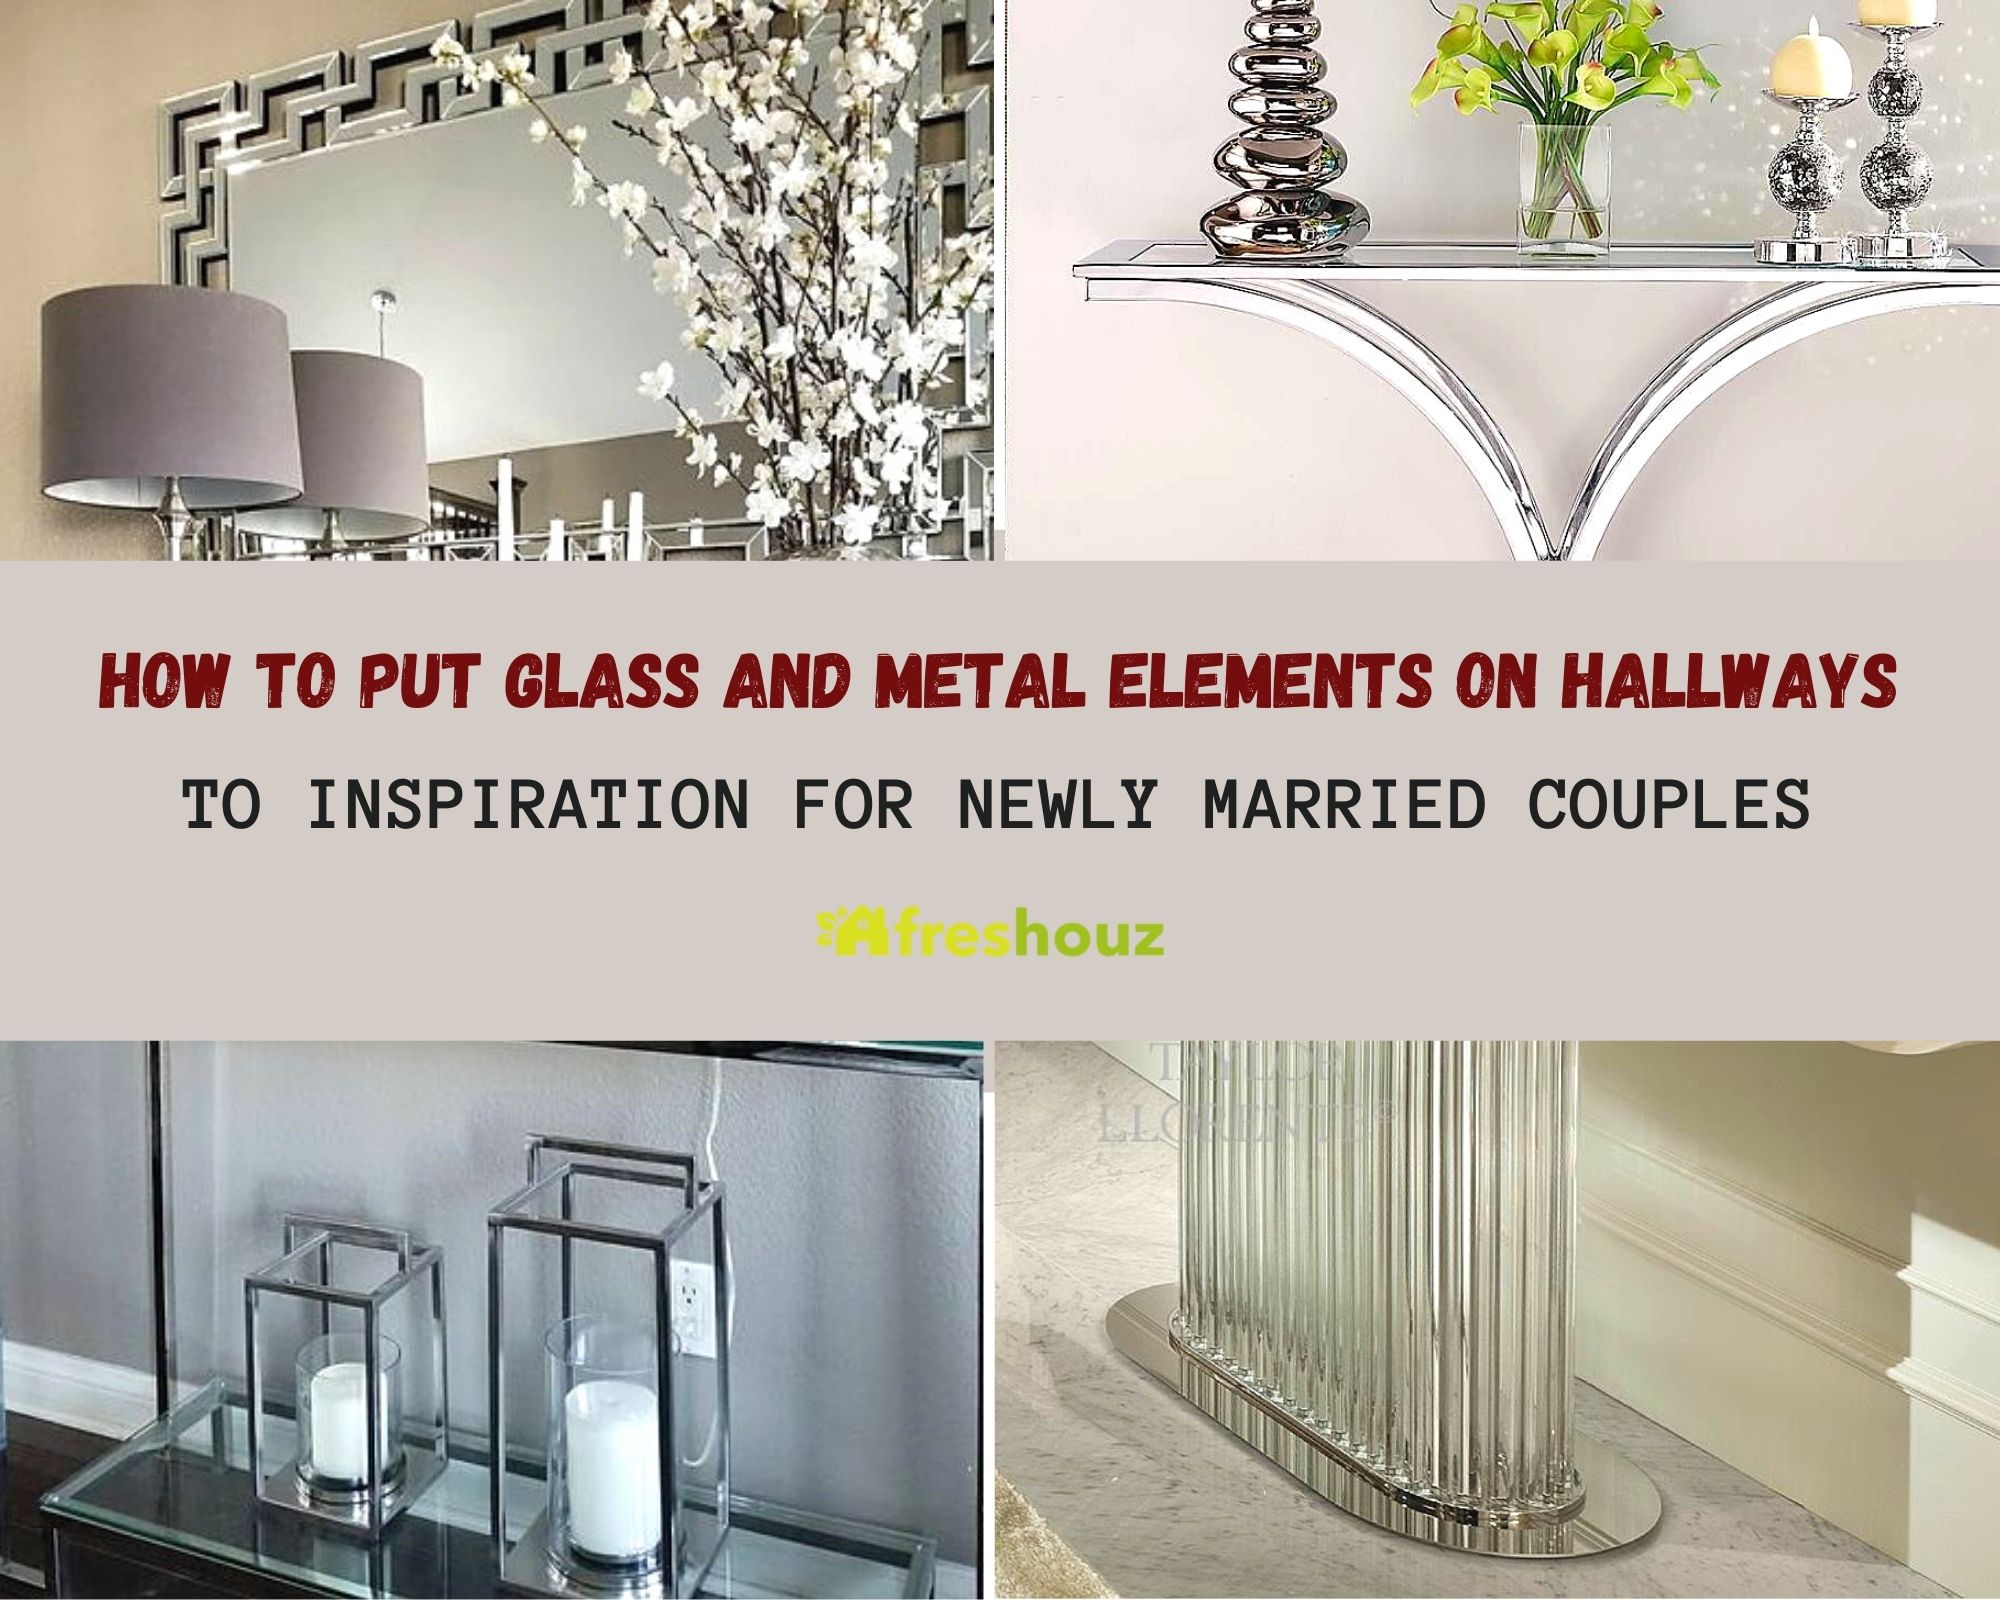 How To Put Glass And Metal Elements On Hallways To Inspiration For Newly Married Couples